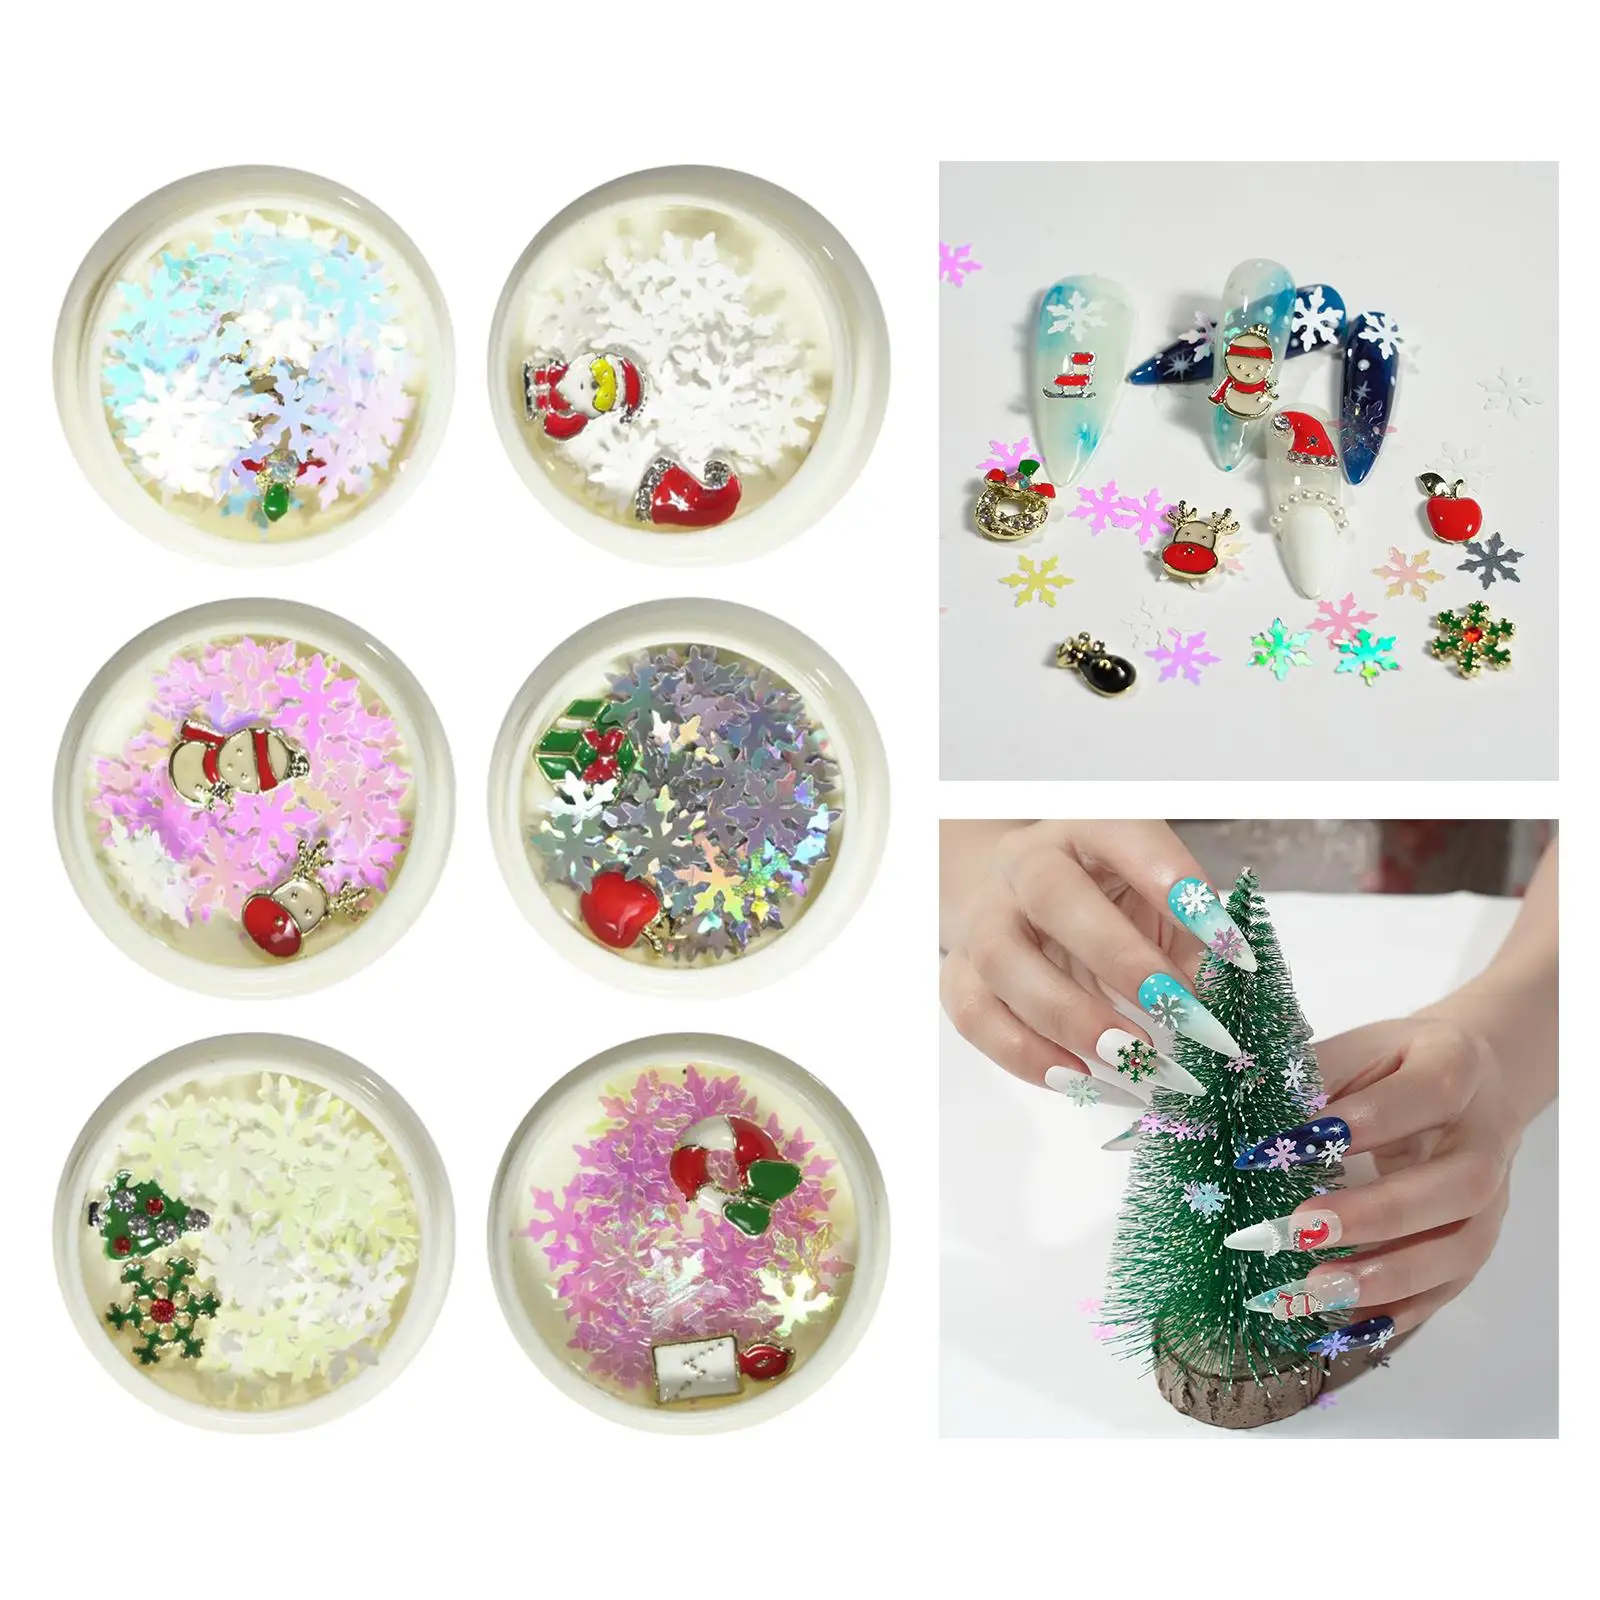 6 Colors Christmas Nail Art Sequins, Manicure Tips DIY Christmas Decorations Nail Sticker Decals Glitters Set Salon Home Use